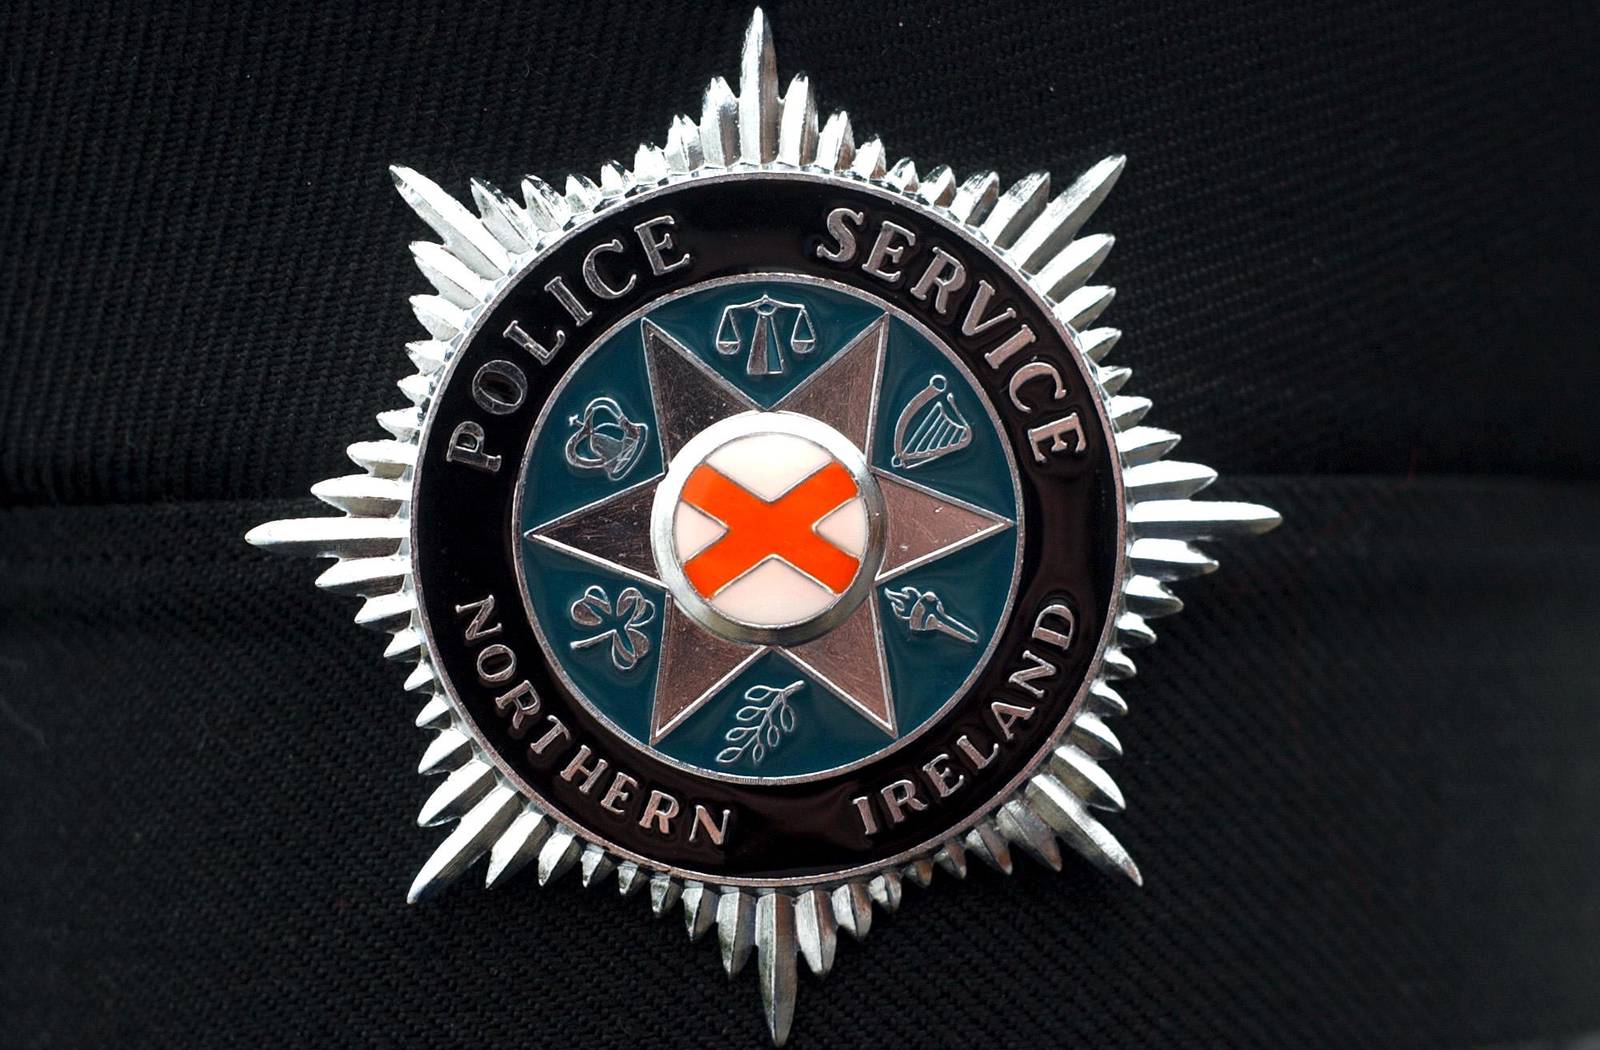 Derry no1-27/3/02-Trevor McBride picture-PSNI unifor
the new PSNI cap emblem(cap badge)at afternoon press conference in Derry-see story